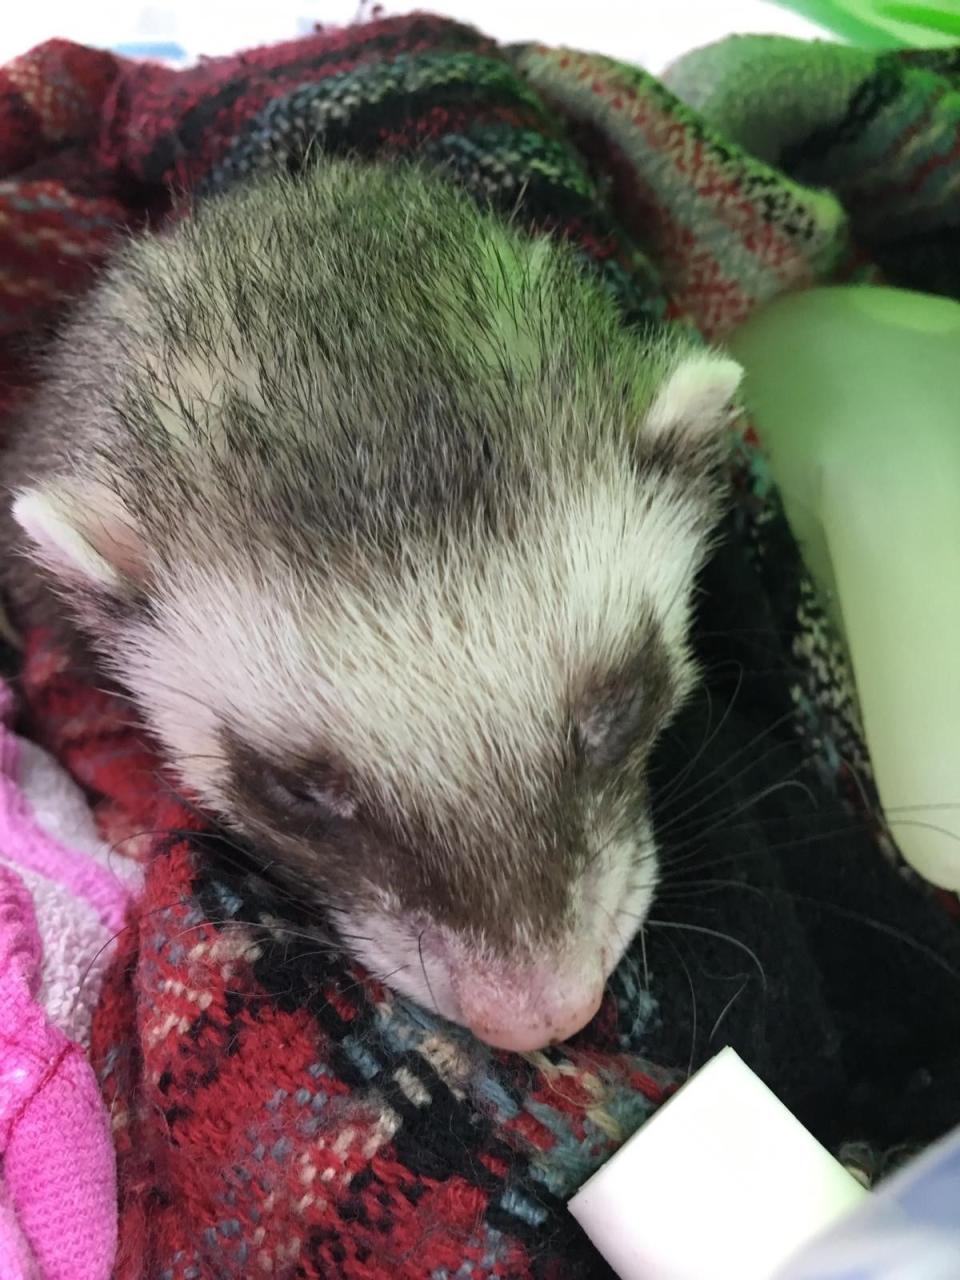 Bandit’s owners were worried sick after they took him to the vetPA